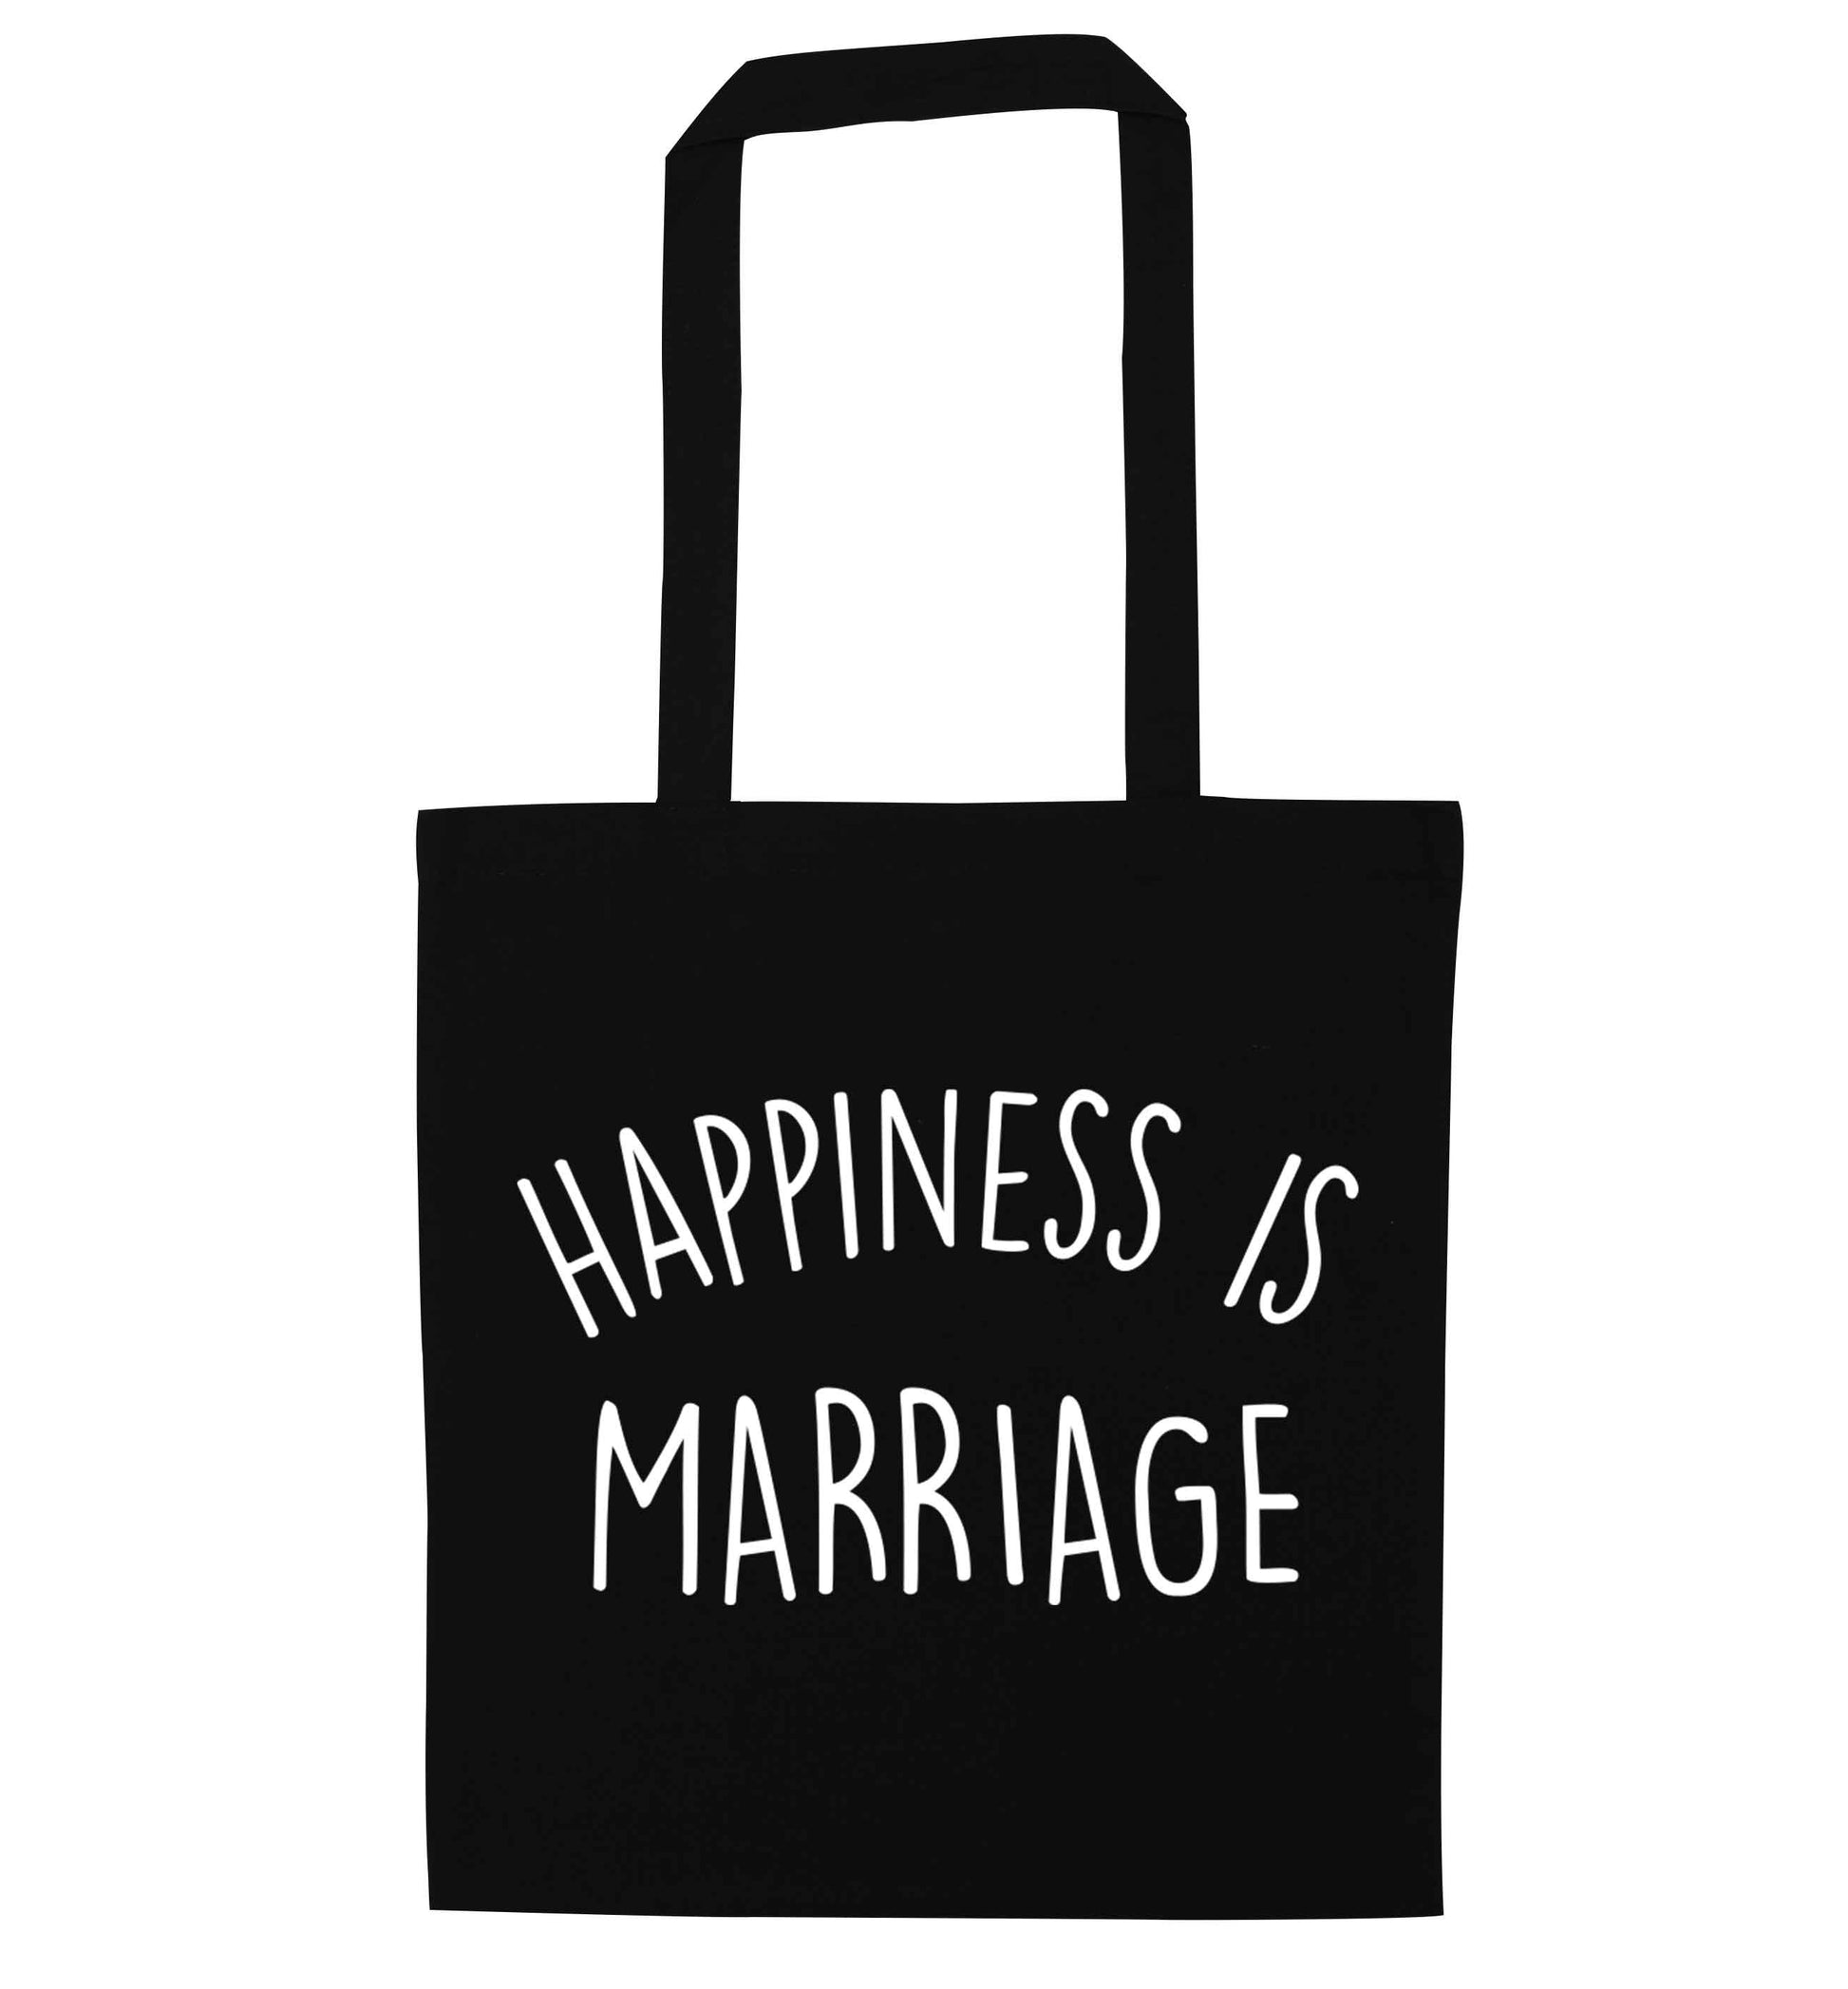 Happiness is wedding planning black tote bag